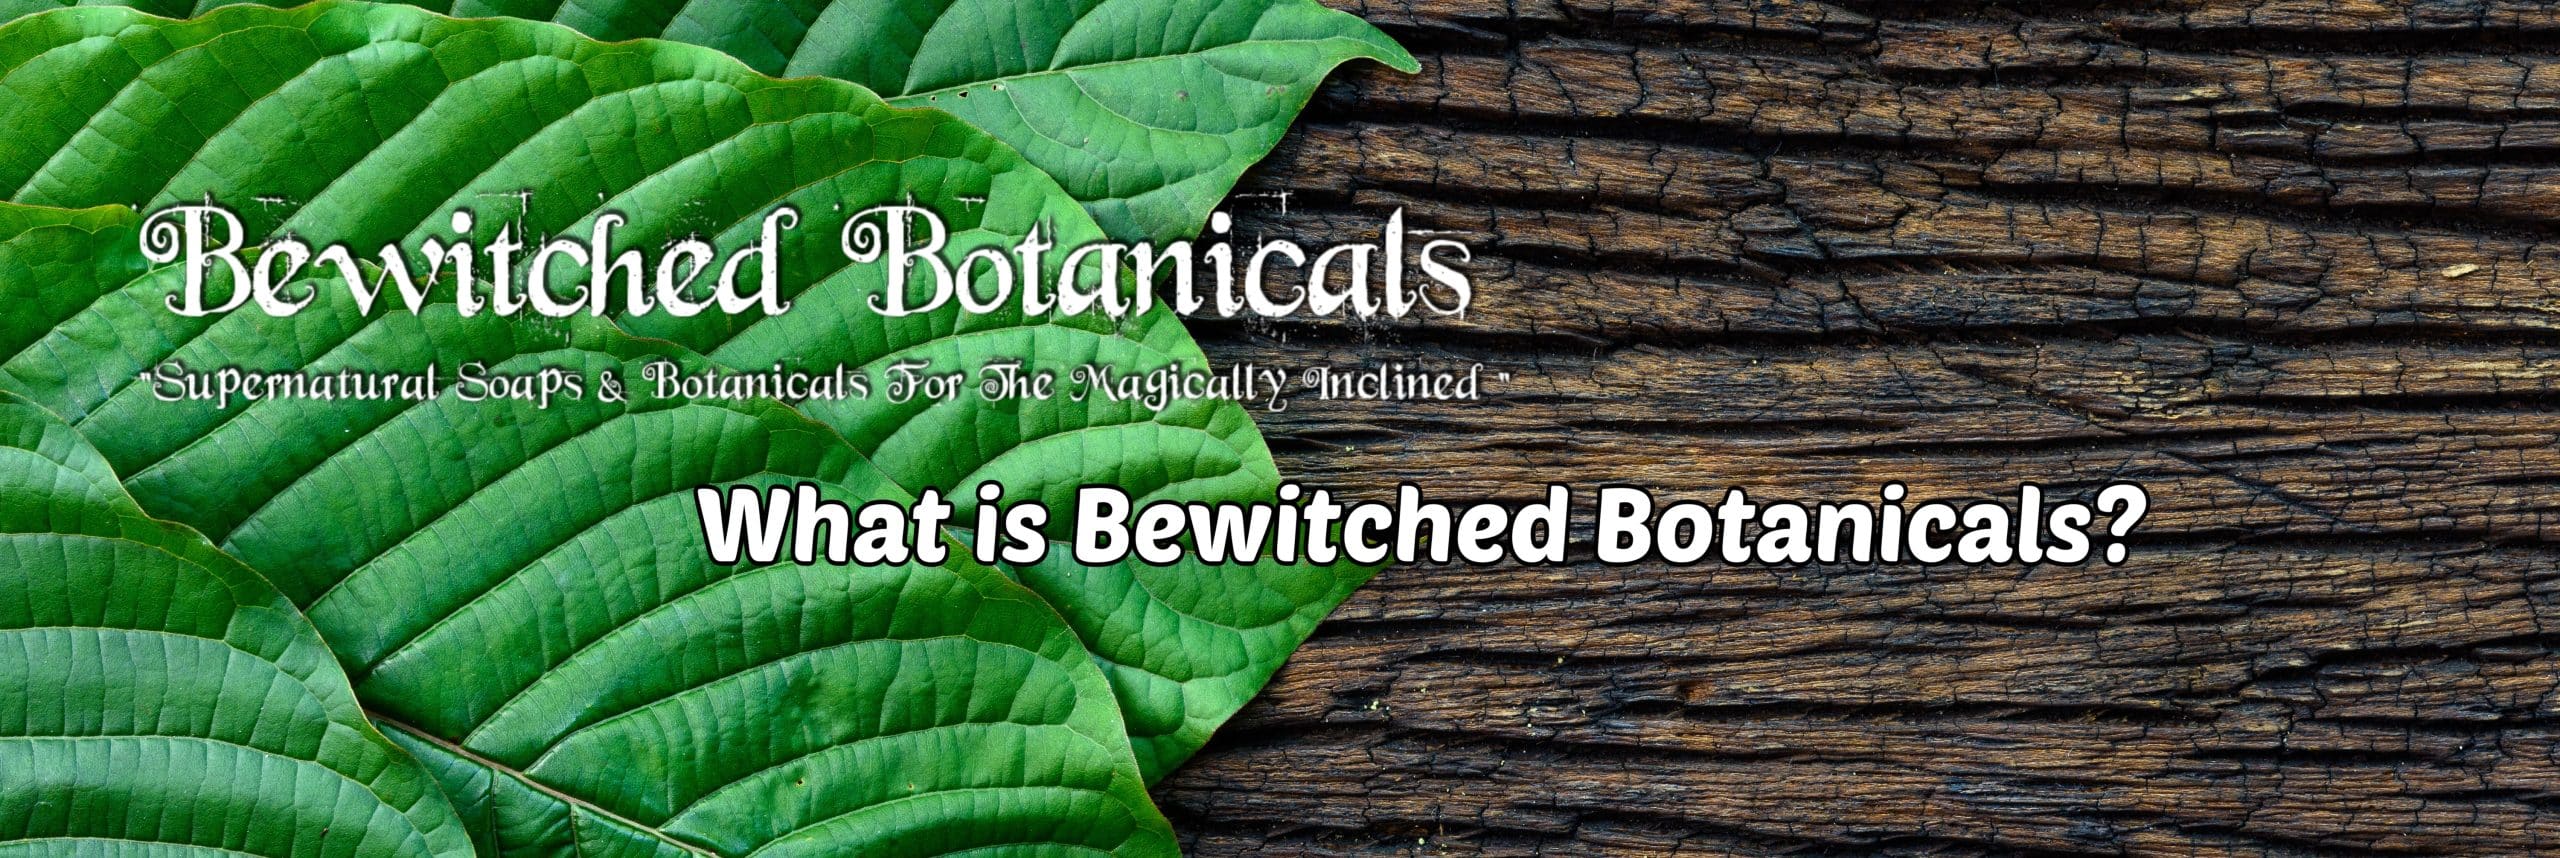 image of what is bewitched botanicals 